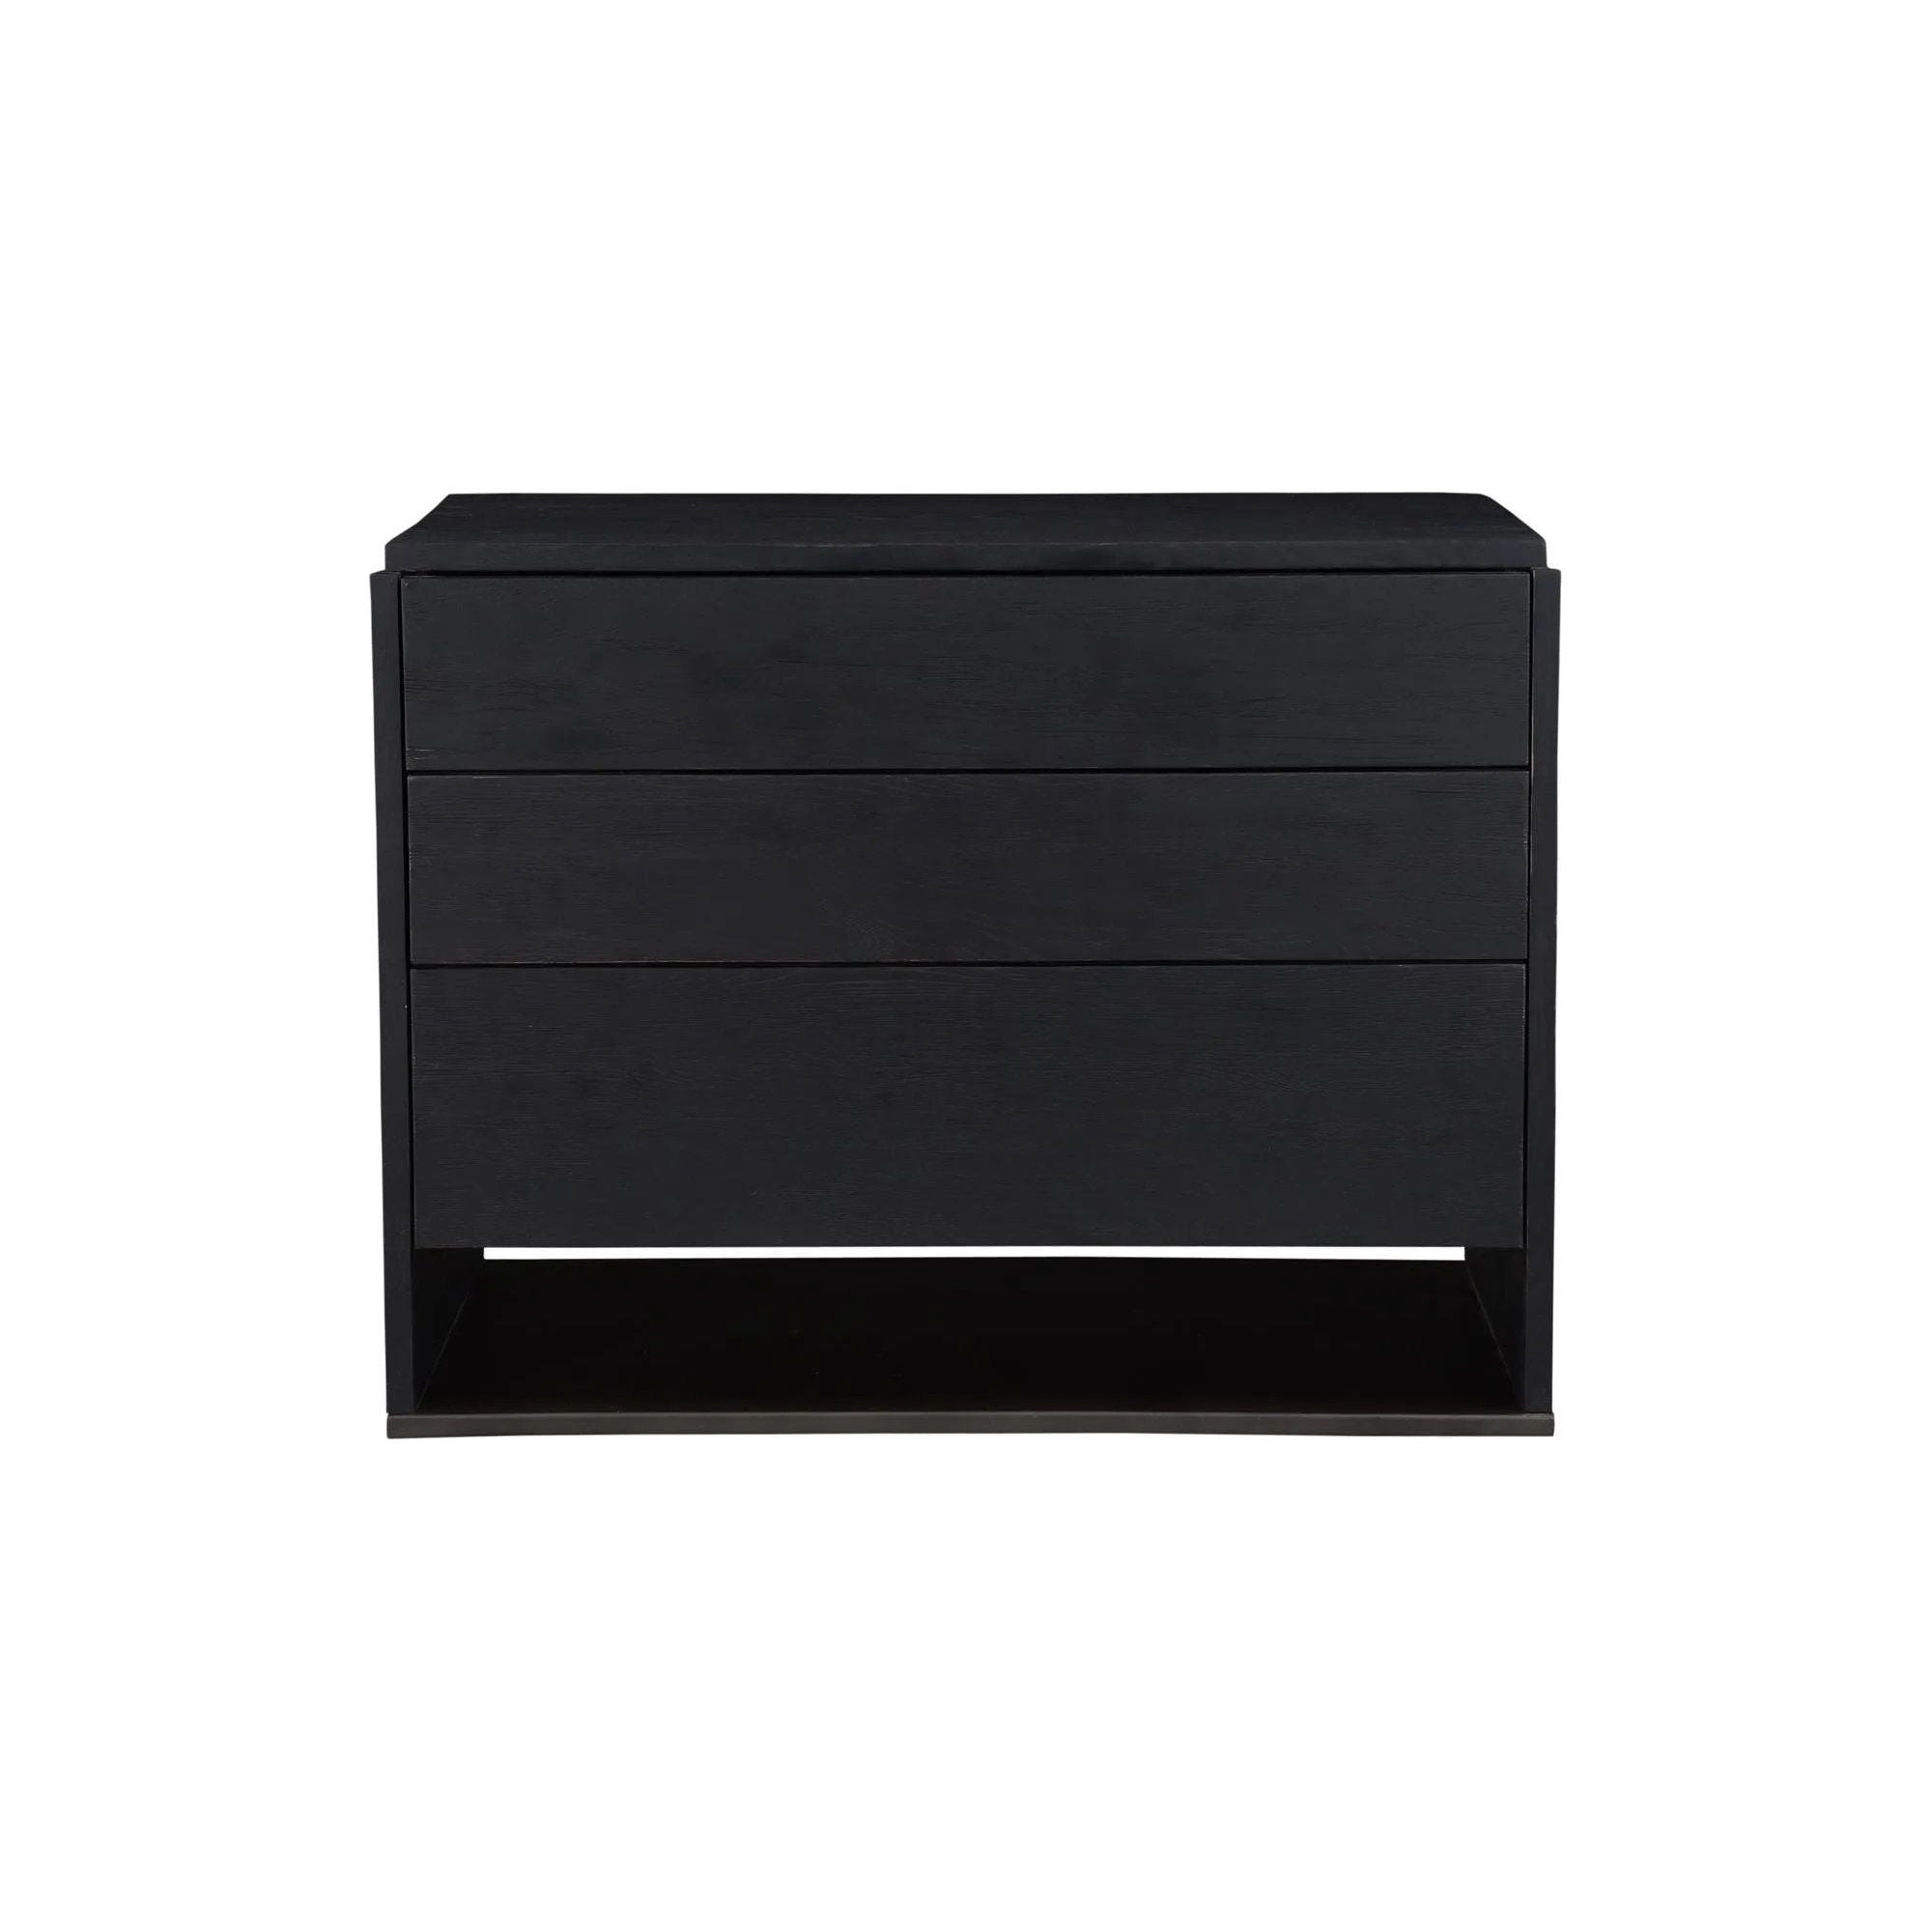 Bold in black, Quinton is a natural storage solution at home in any style. This solid oak chest of drawers is generously fitted with 3 spacious mango wood drawers. Supported by a sleek iron sheet base, Quinton is all clean lines for a seamless, contemporary finish—a handy storage essential Amethyst Home provides interior design, new home construction design consulting, vintage area rugs, and lighting in the Salt Lake City metro area.